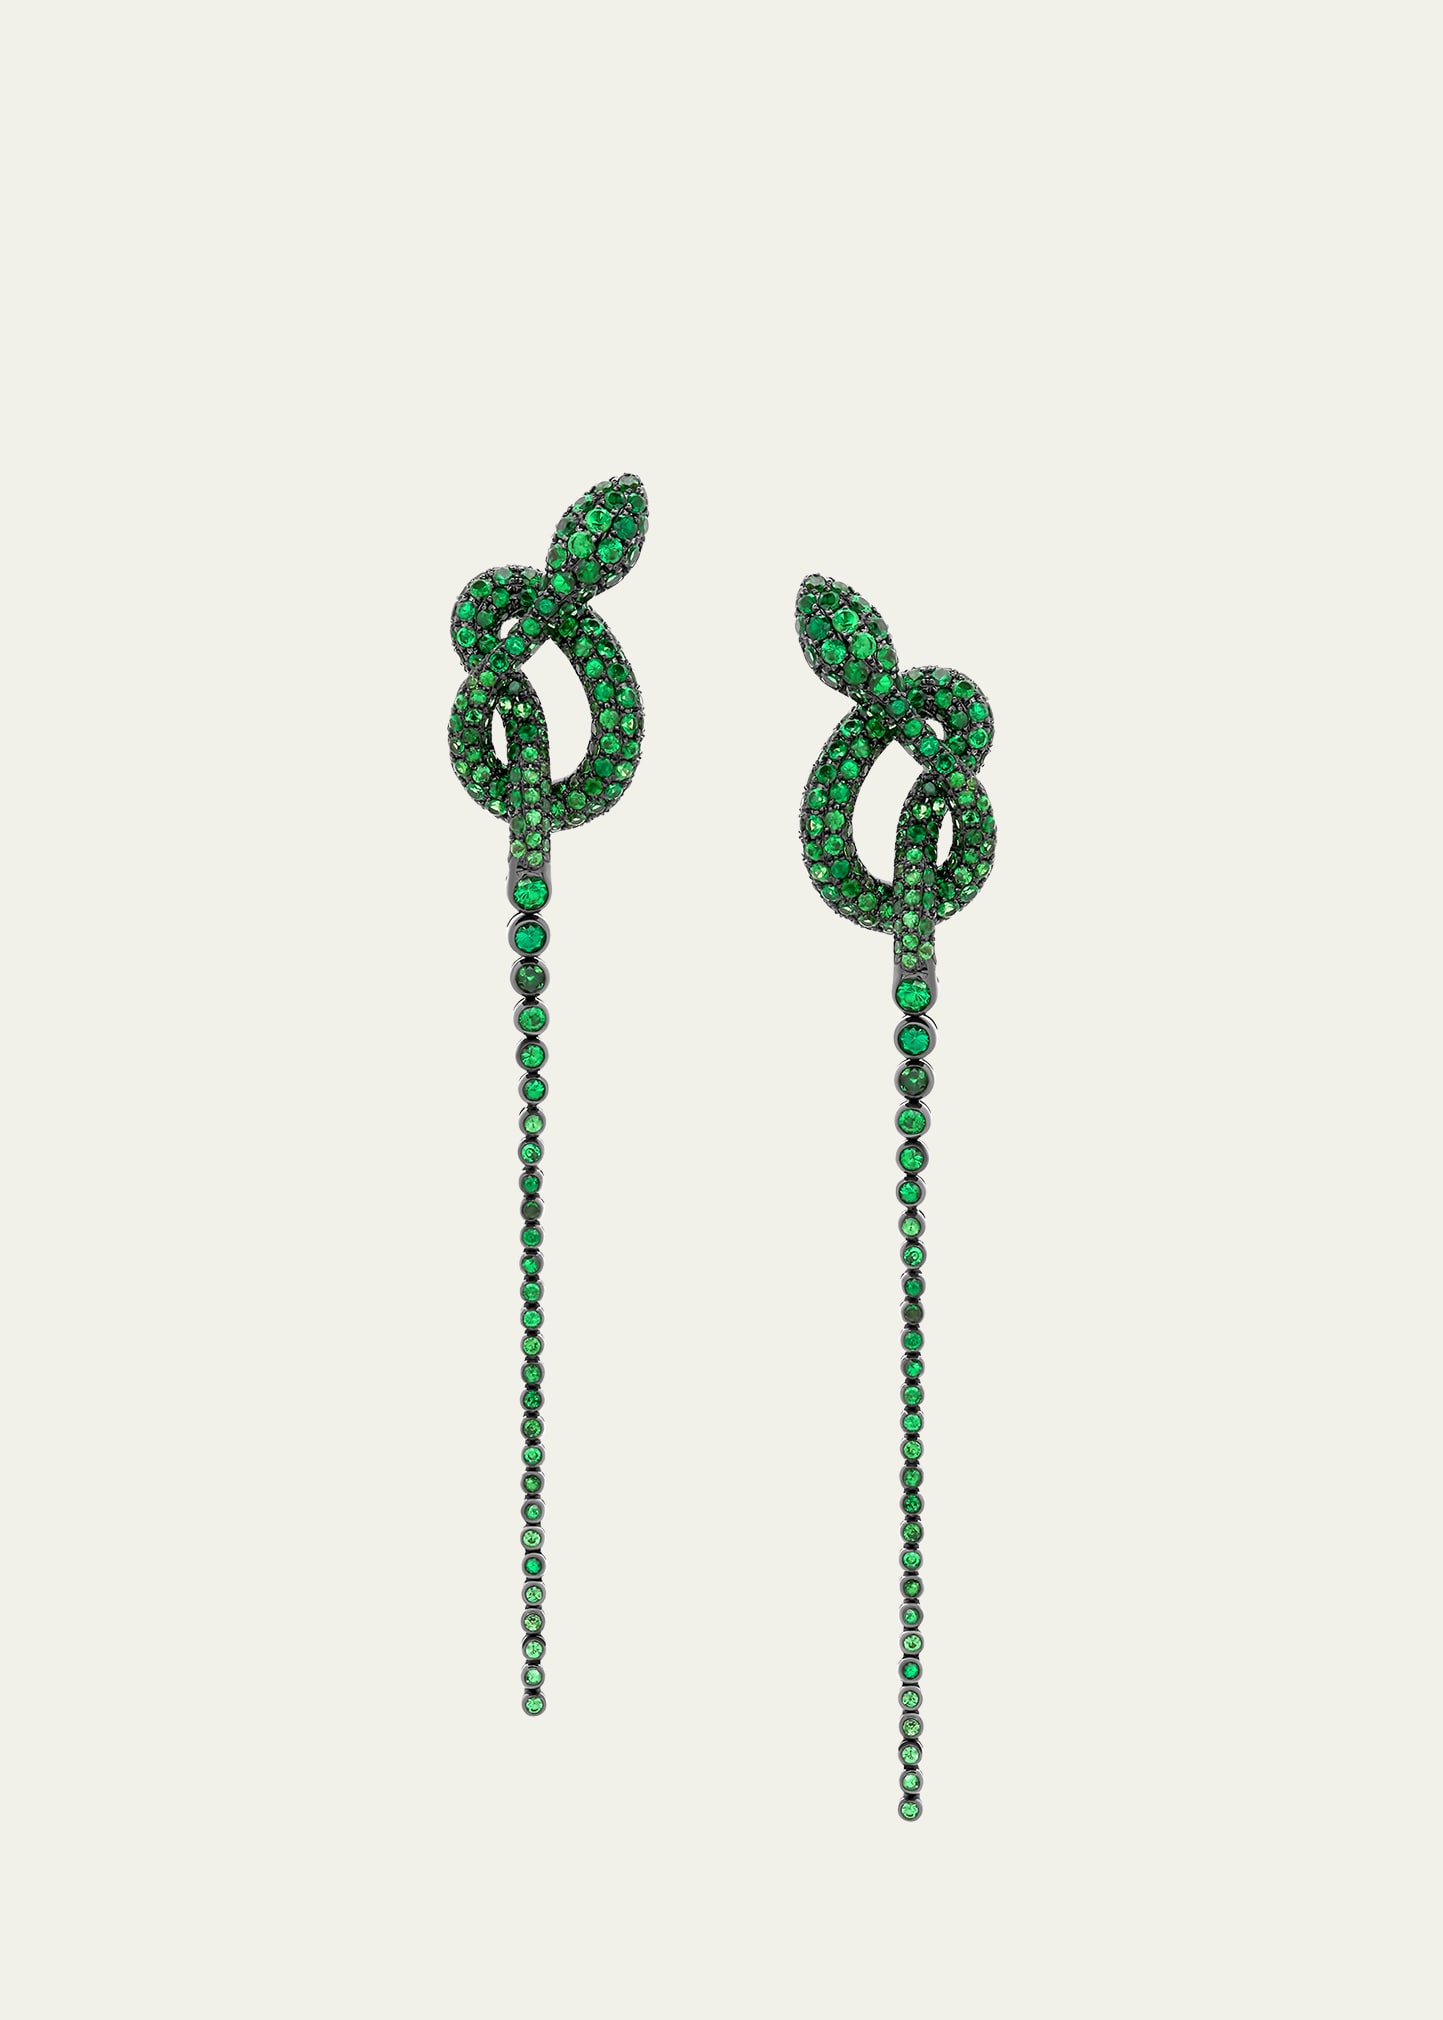 Stéfère White Gold Tsovorite Earrings From The Snake Collection In Green